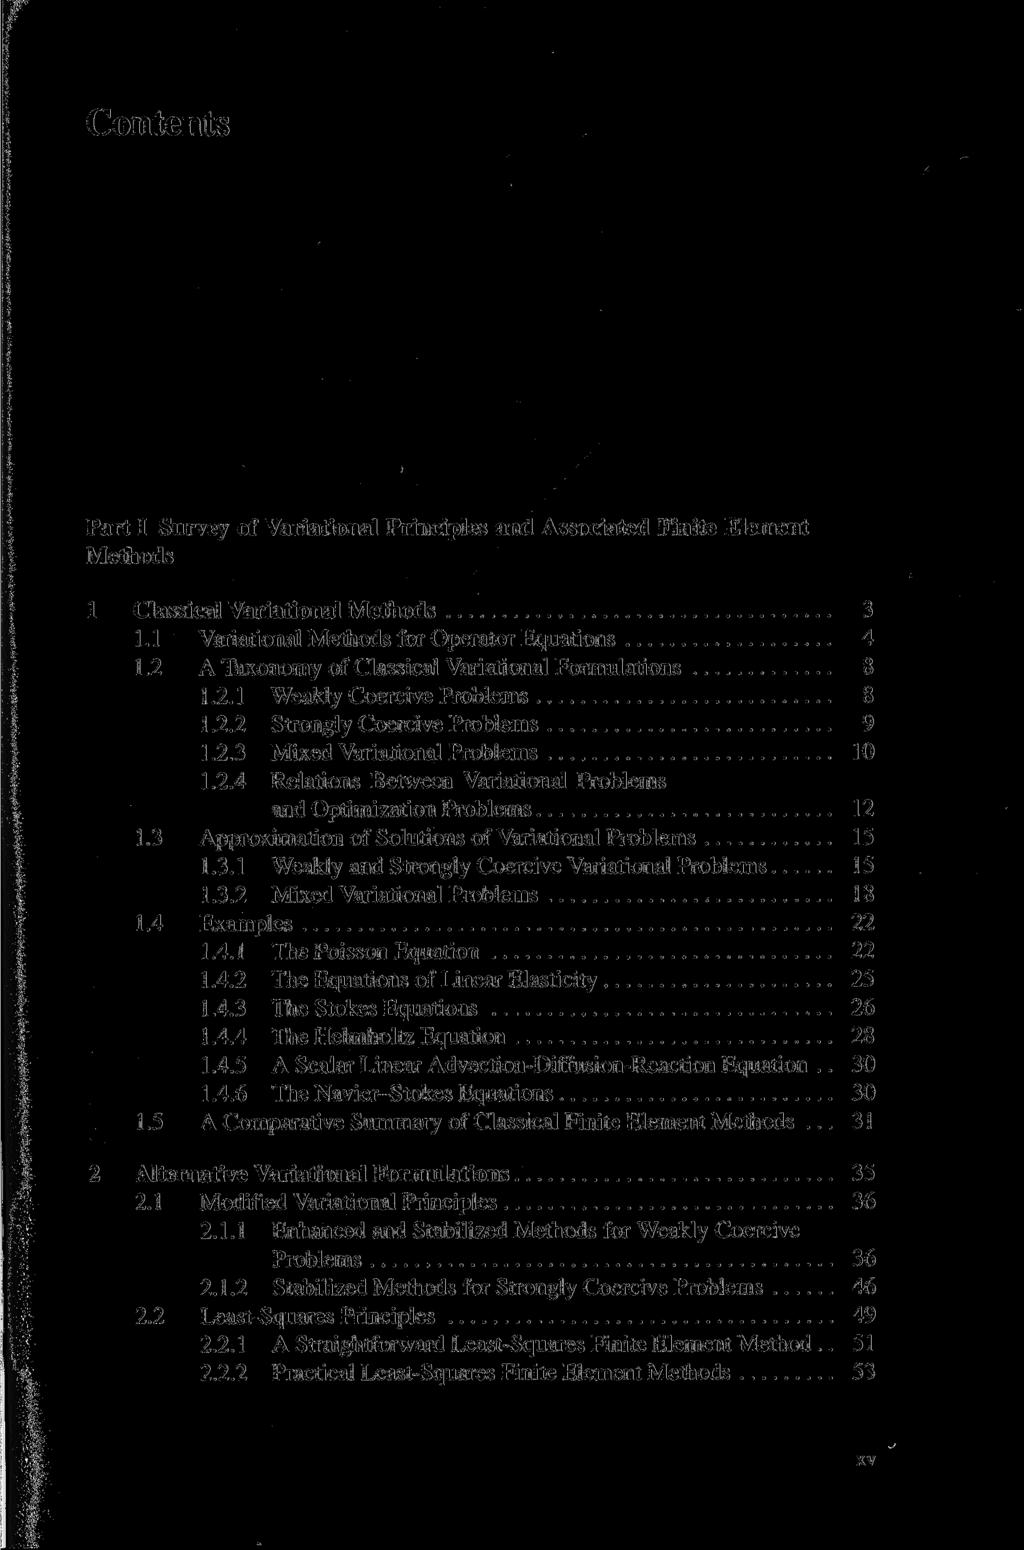 Contents Part I Survey of Variational Principles and Associated Finite Element Methods 1 Classical Variational Methods 3 1.1 Variational Methods for Operator Equations 4 1.